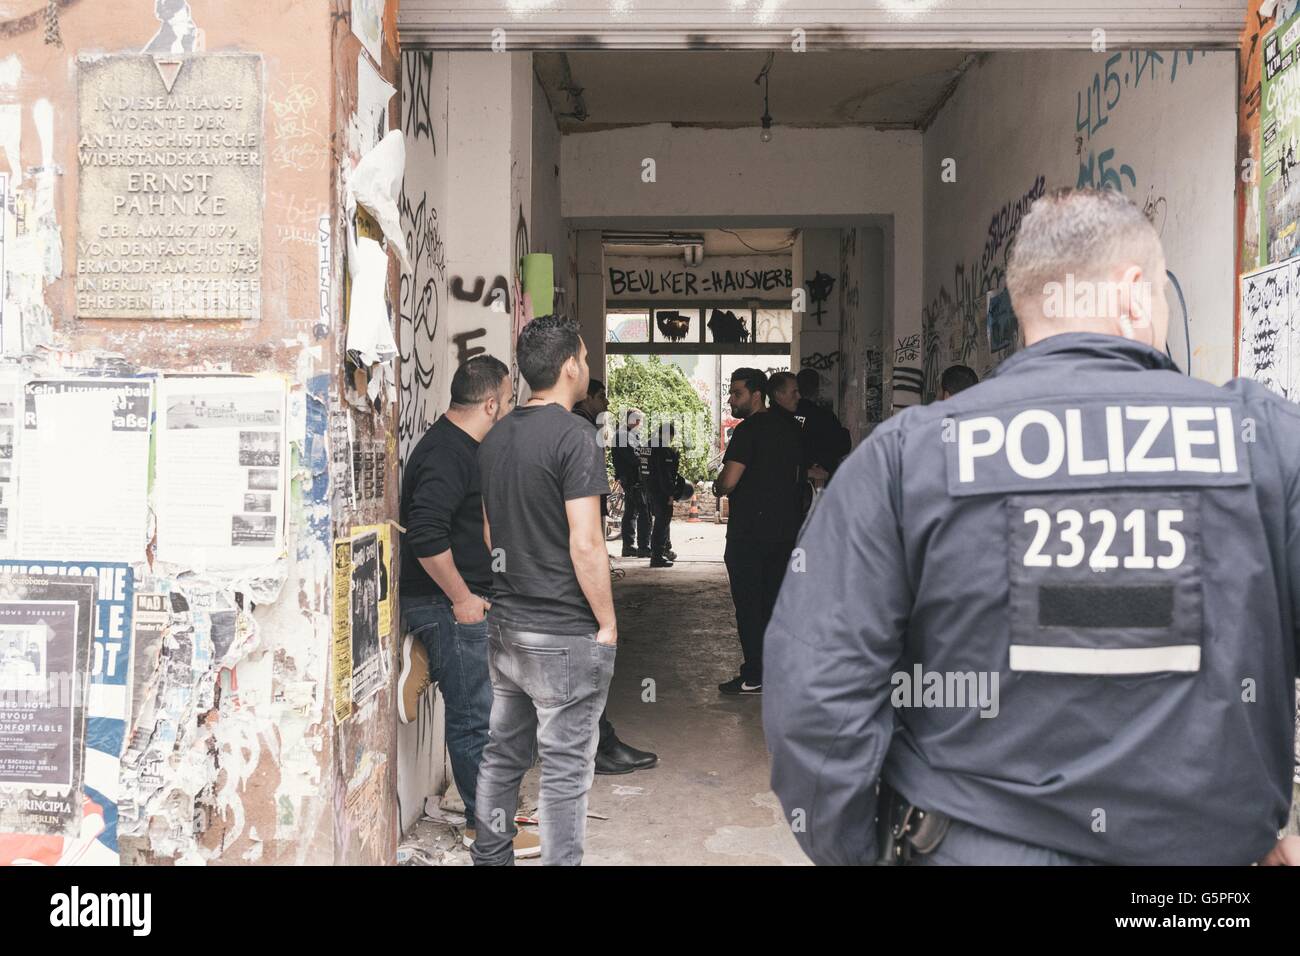 Berlin, Berlin, Germany. 22nd June, 2016. Police officers and private security in front of the left wing housing project in the Rigaer Street 94 in Berlin Friedrichshain. © Jan Scheunert/ZUMA Wire/Alamy Live News Stock Photo